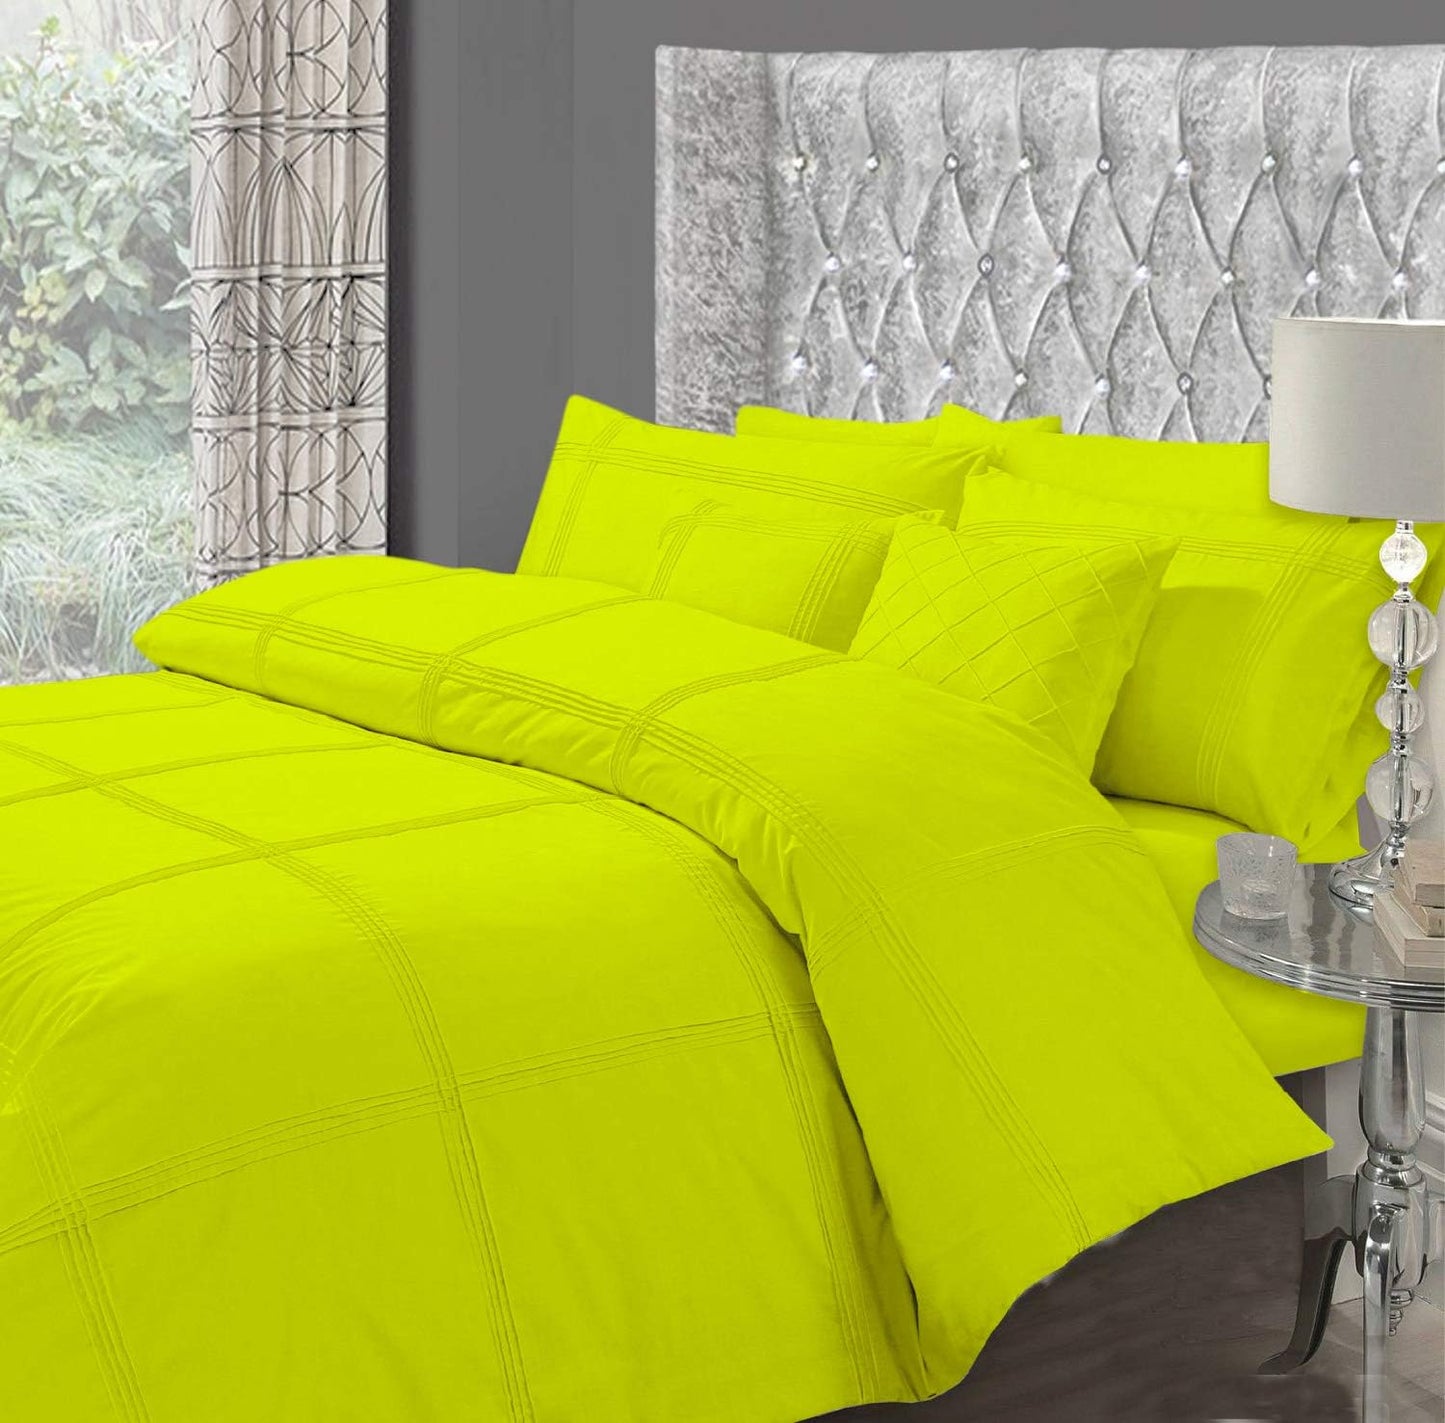 Bedding Set with Pillows lime green